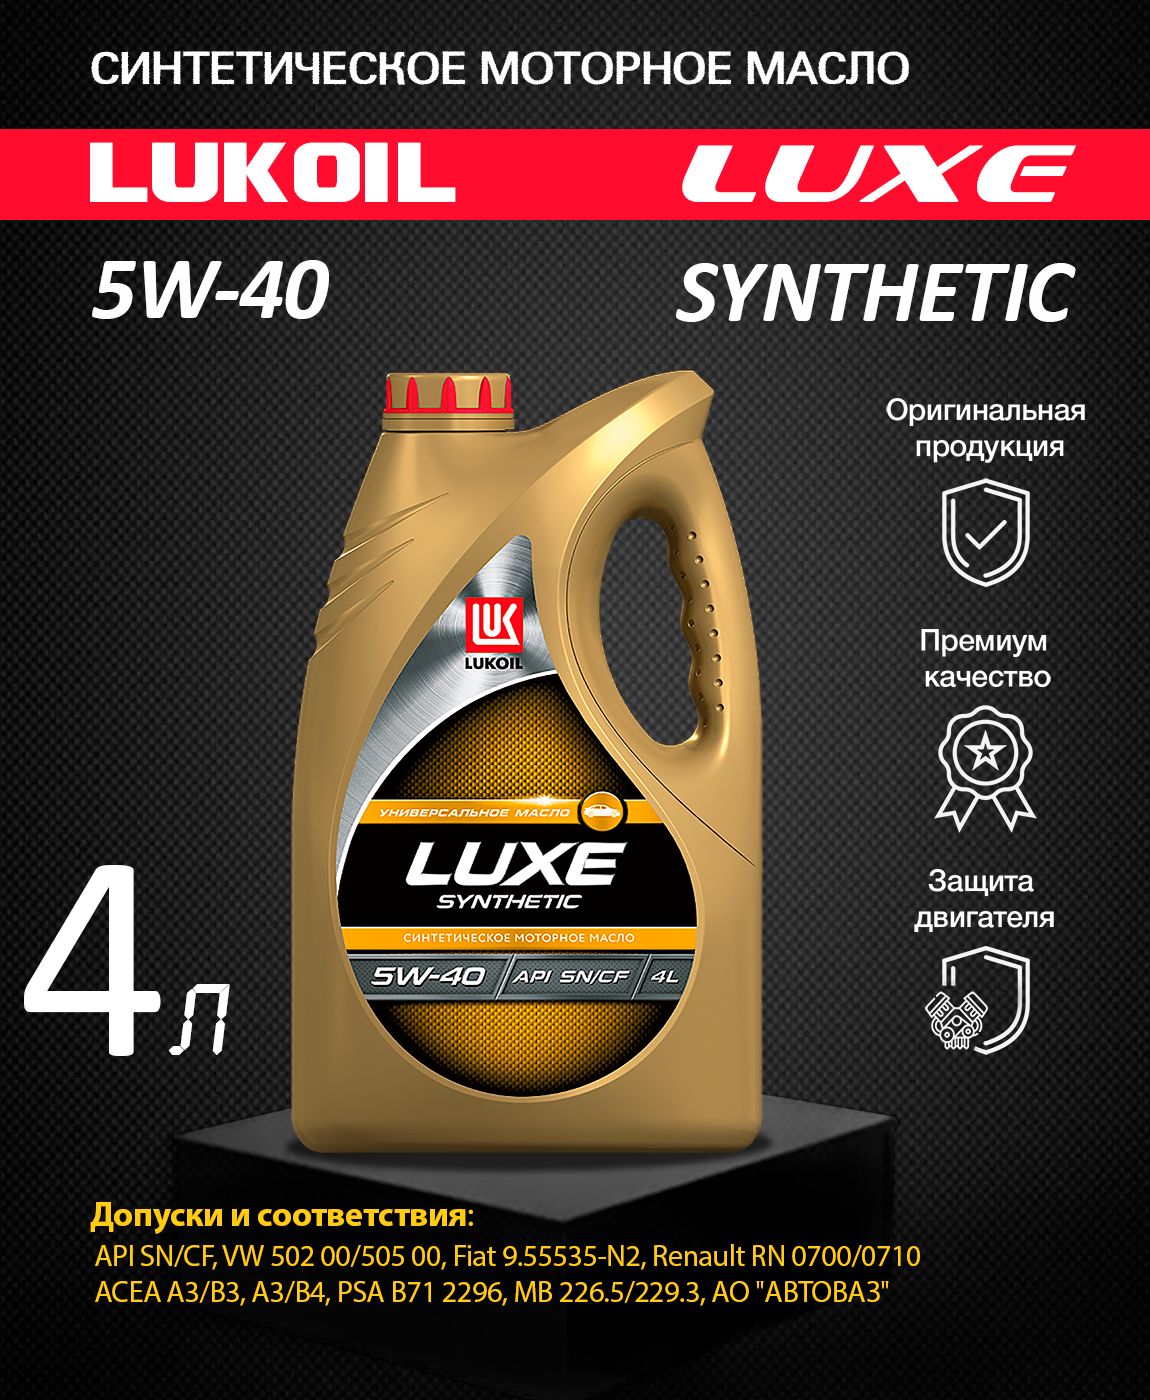 Lukoil Luxe Synthetic 5w-40. Lukoil Luxe Synthetic 5w-40 (ACEA a3/b4-08; API SM/CF). 207465 Лукойл. Автозаправка Лукойл.